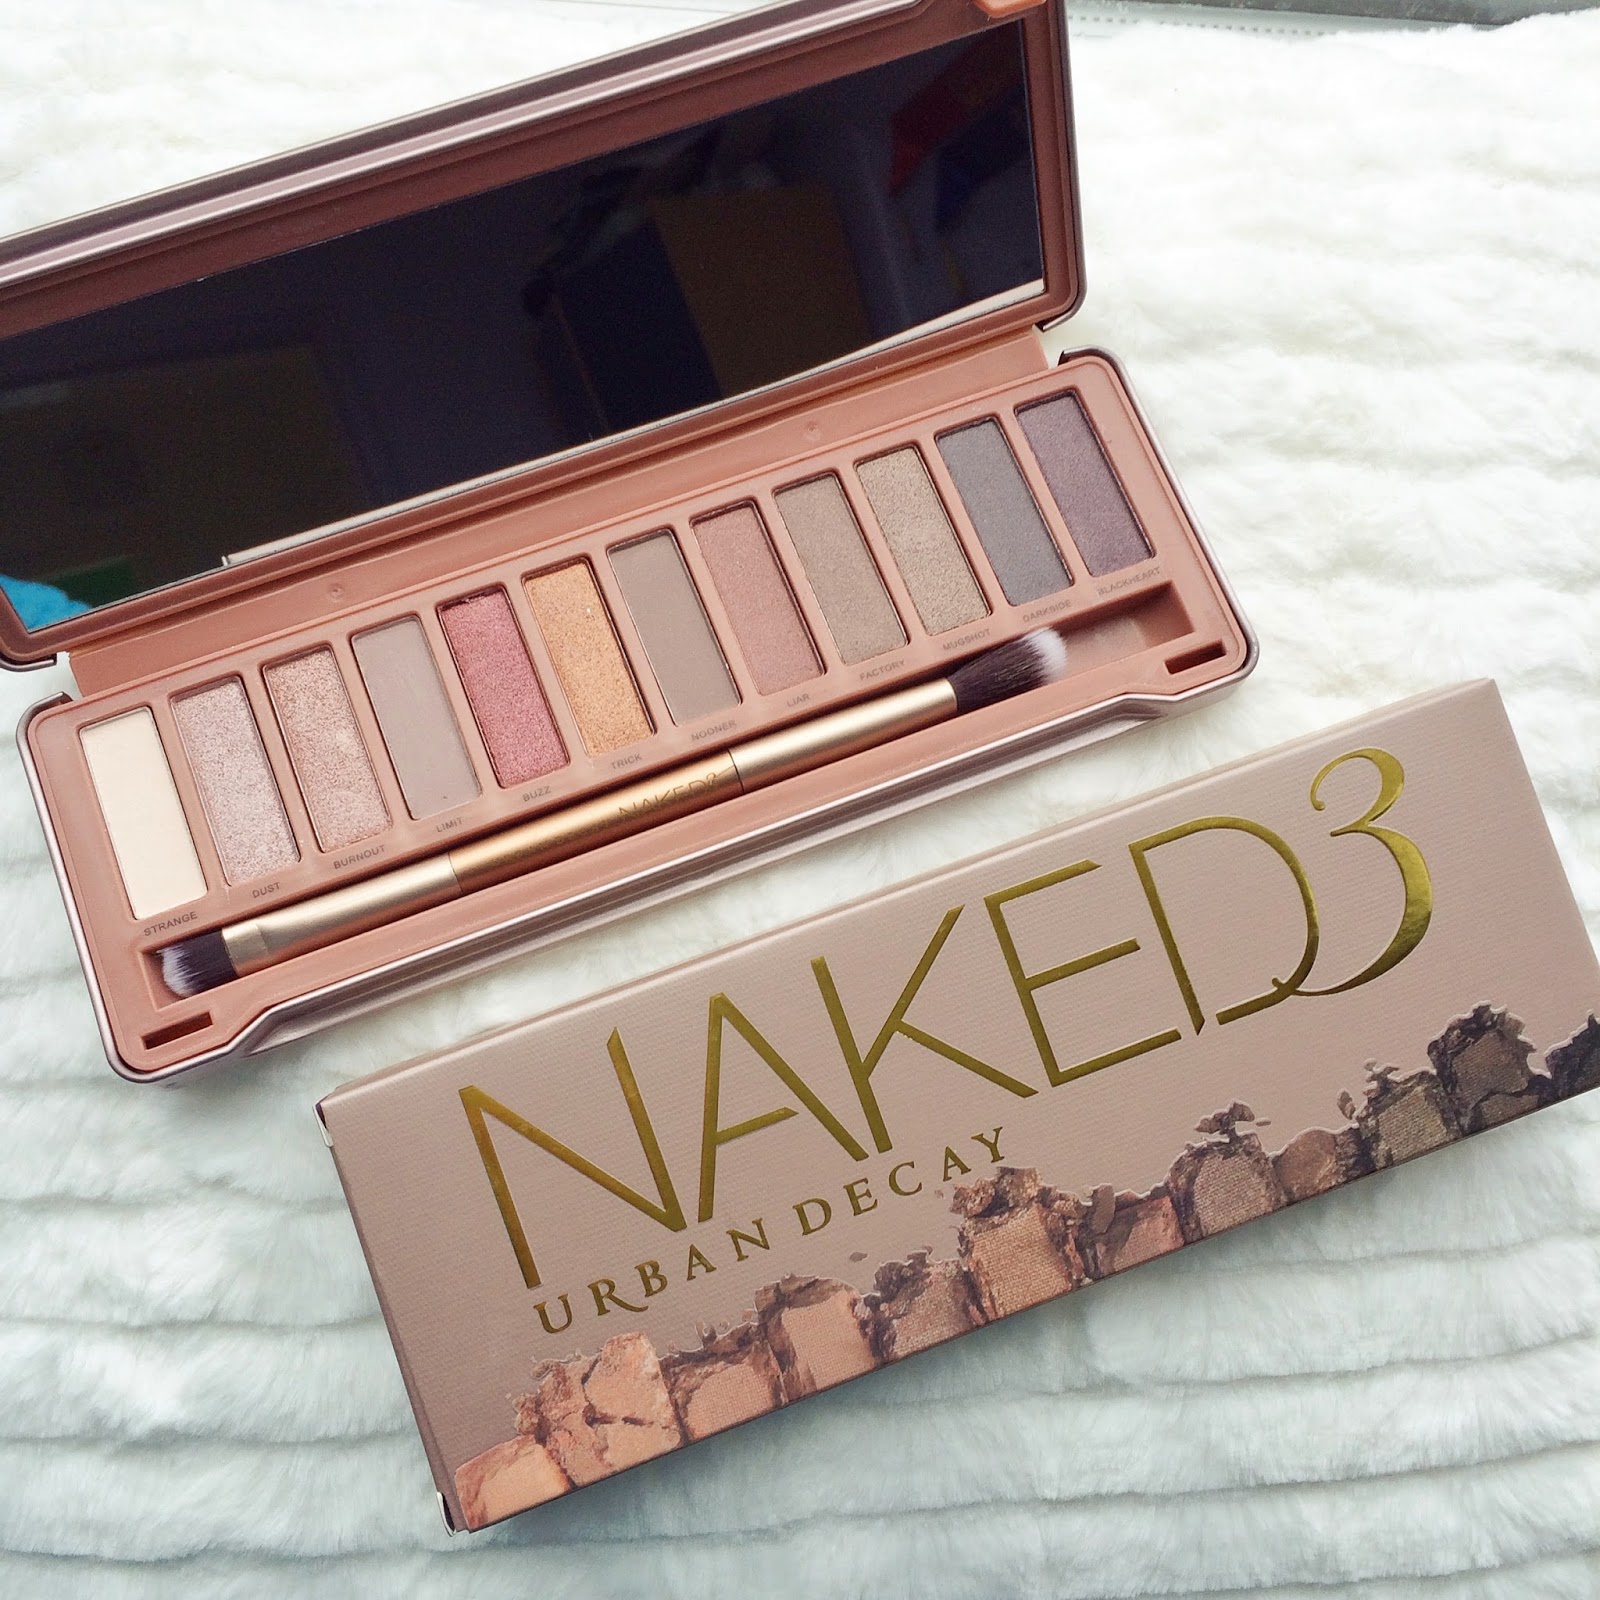 Makeup Madness: Dupe! Urban Decay Naked 3 Palette